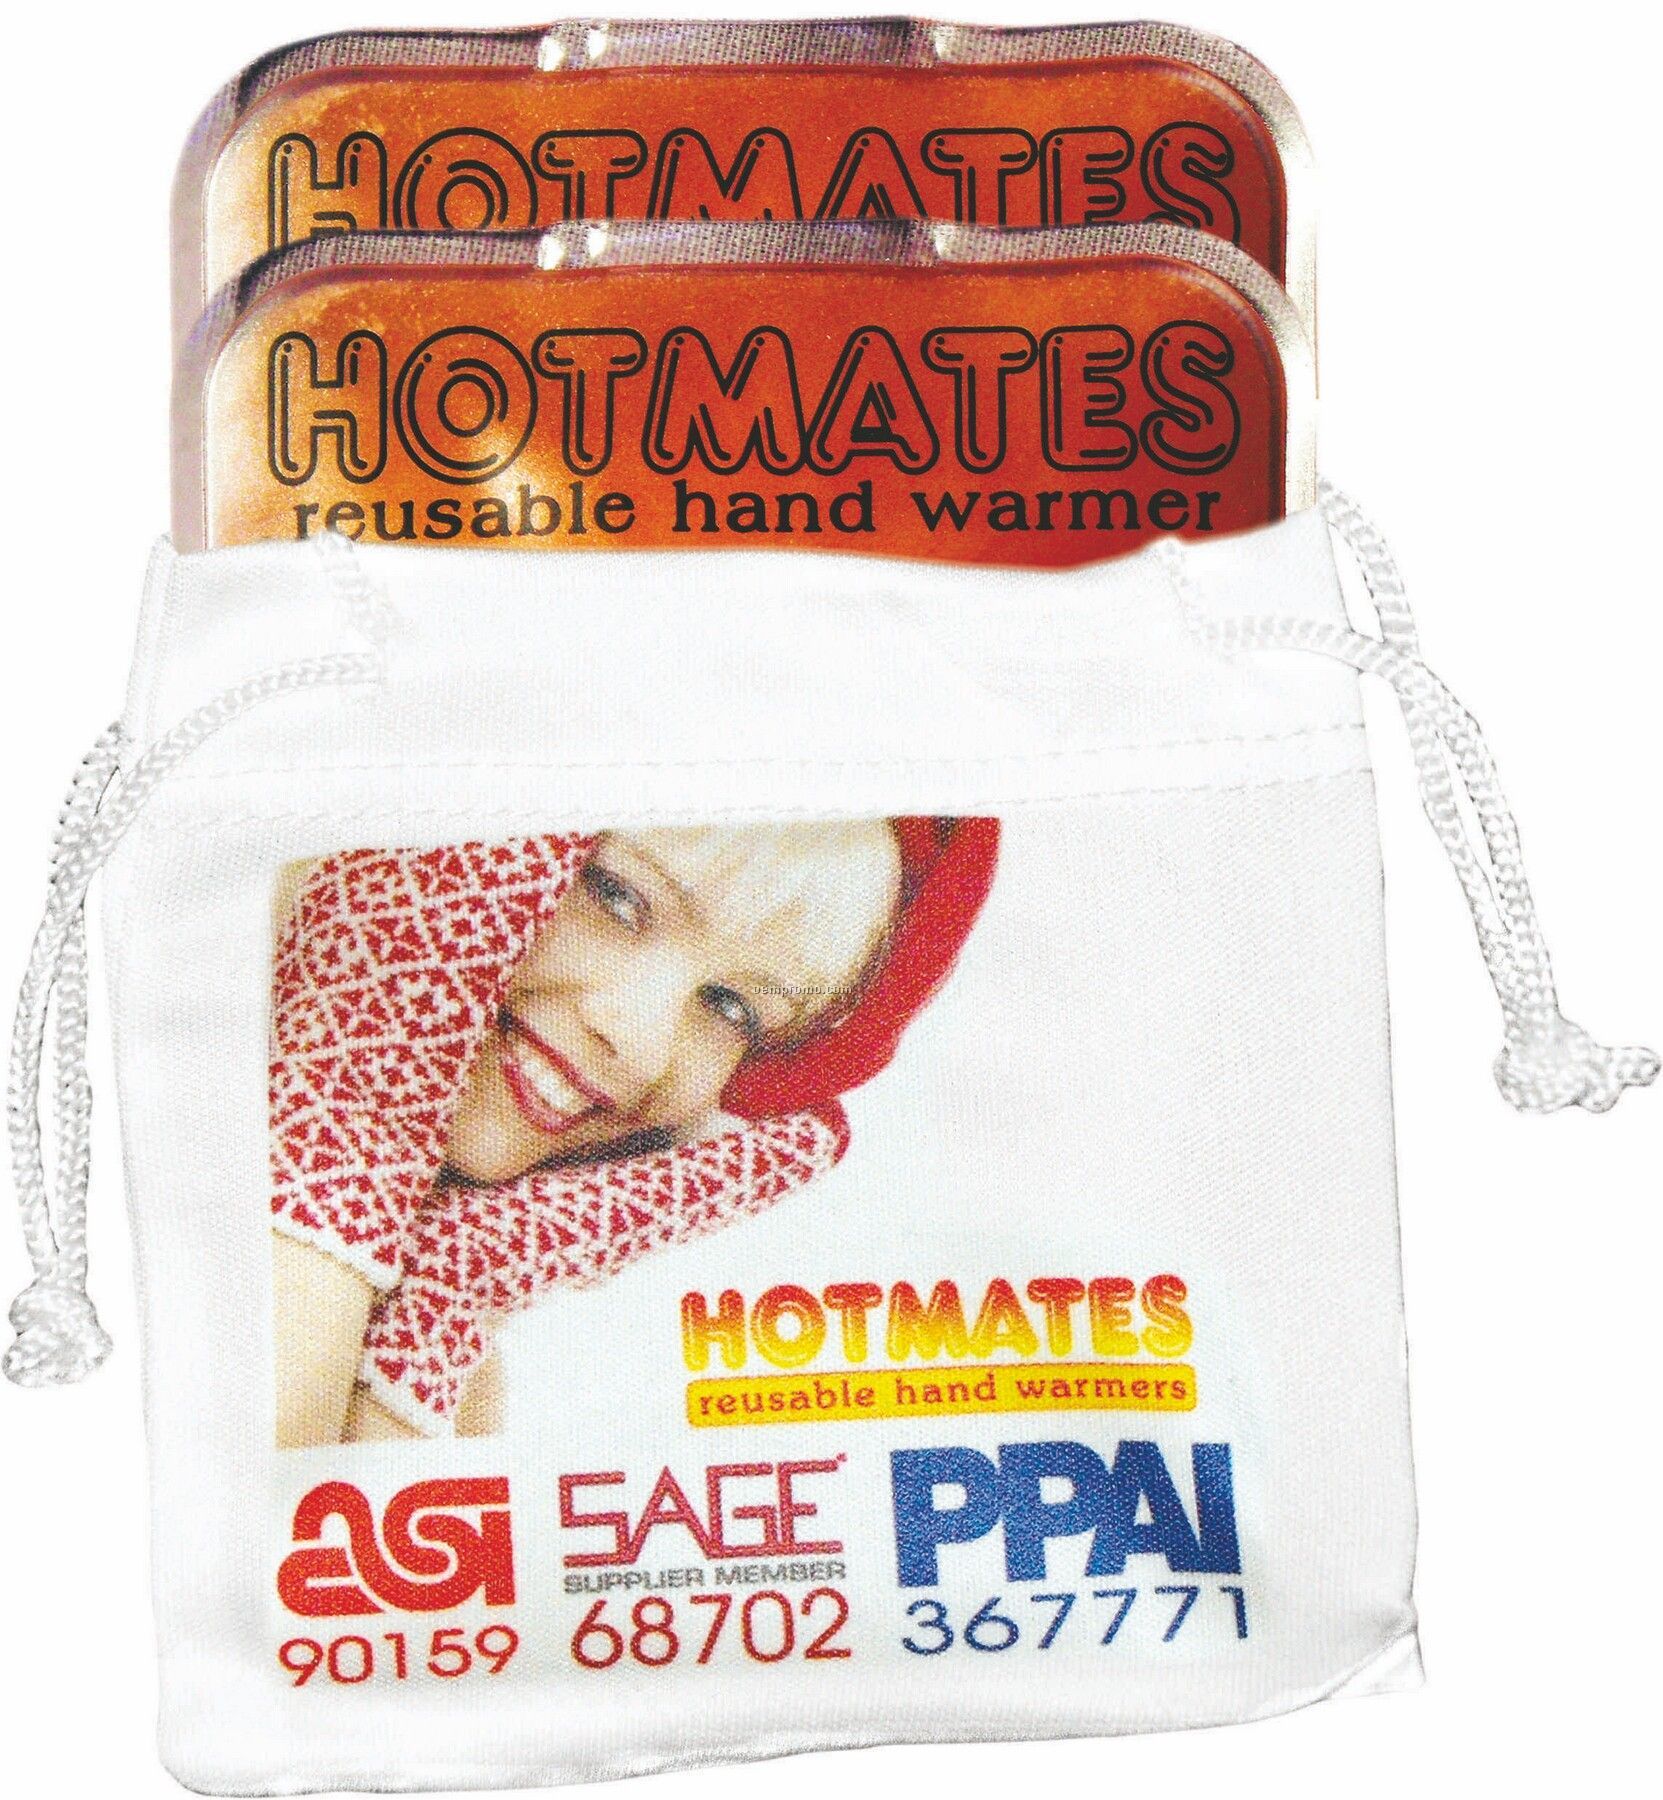 2 Hotmates Reusable Hand Warmers W/ White Micro Fiber Dye Sublimated Pouch